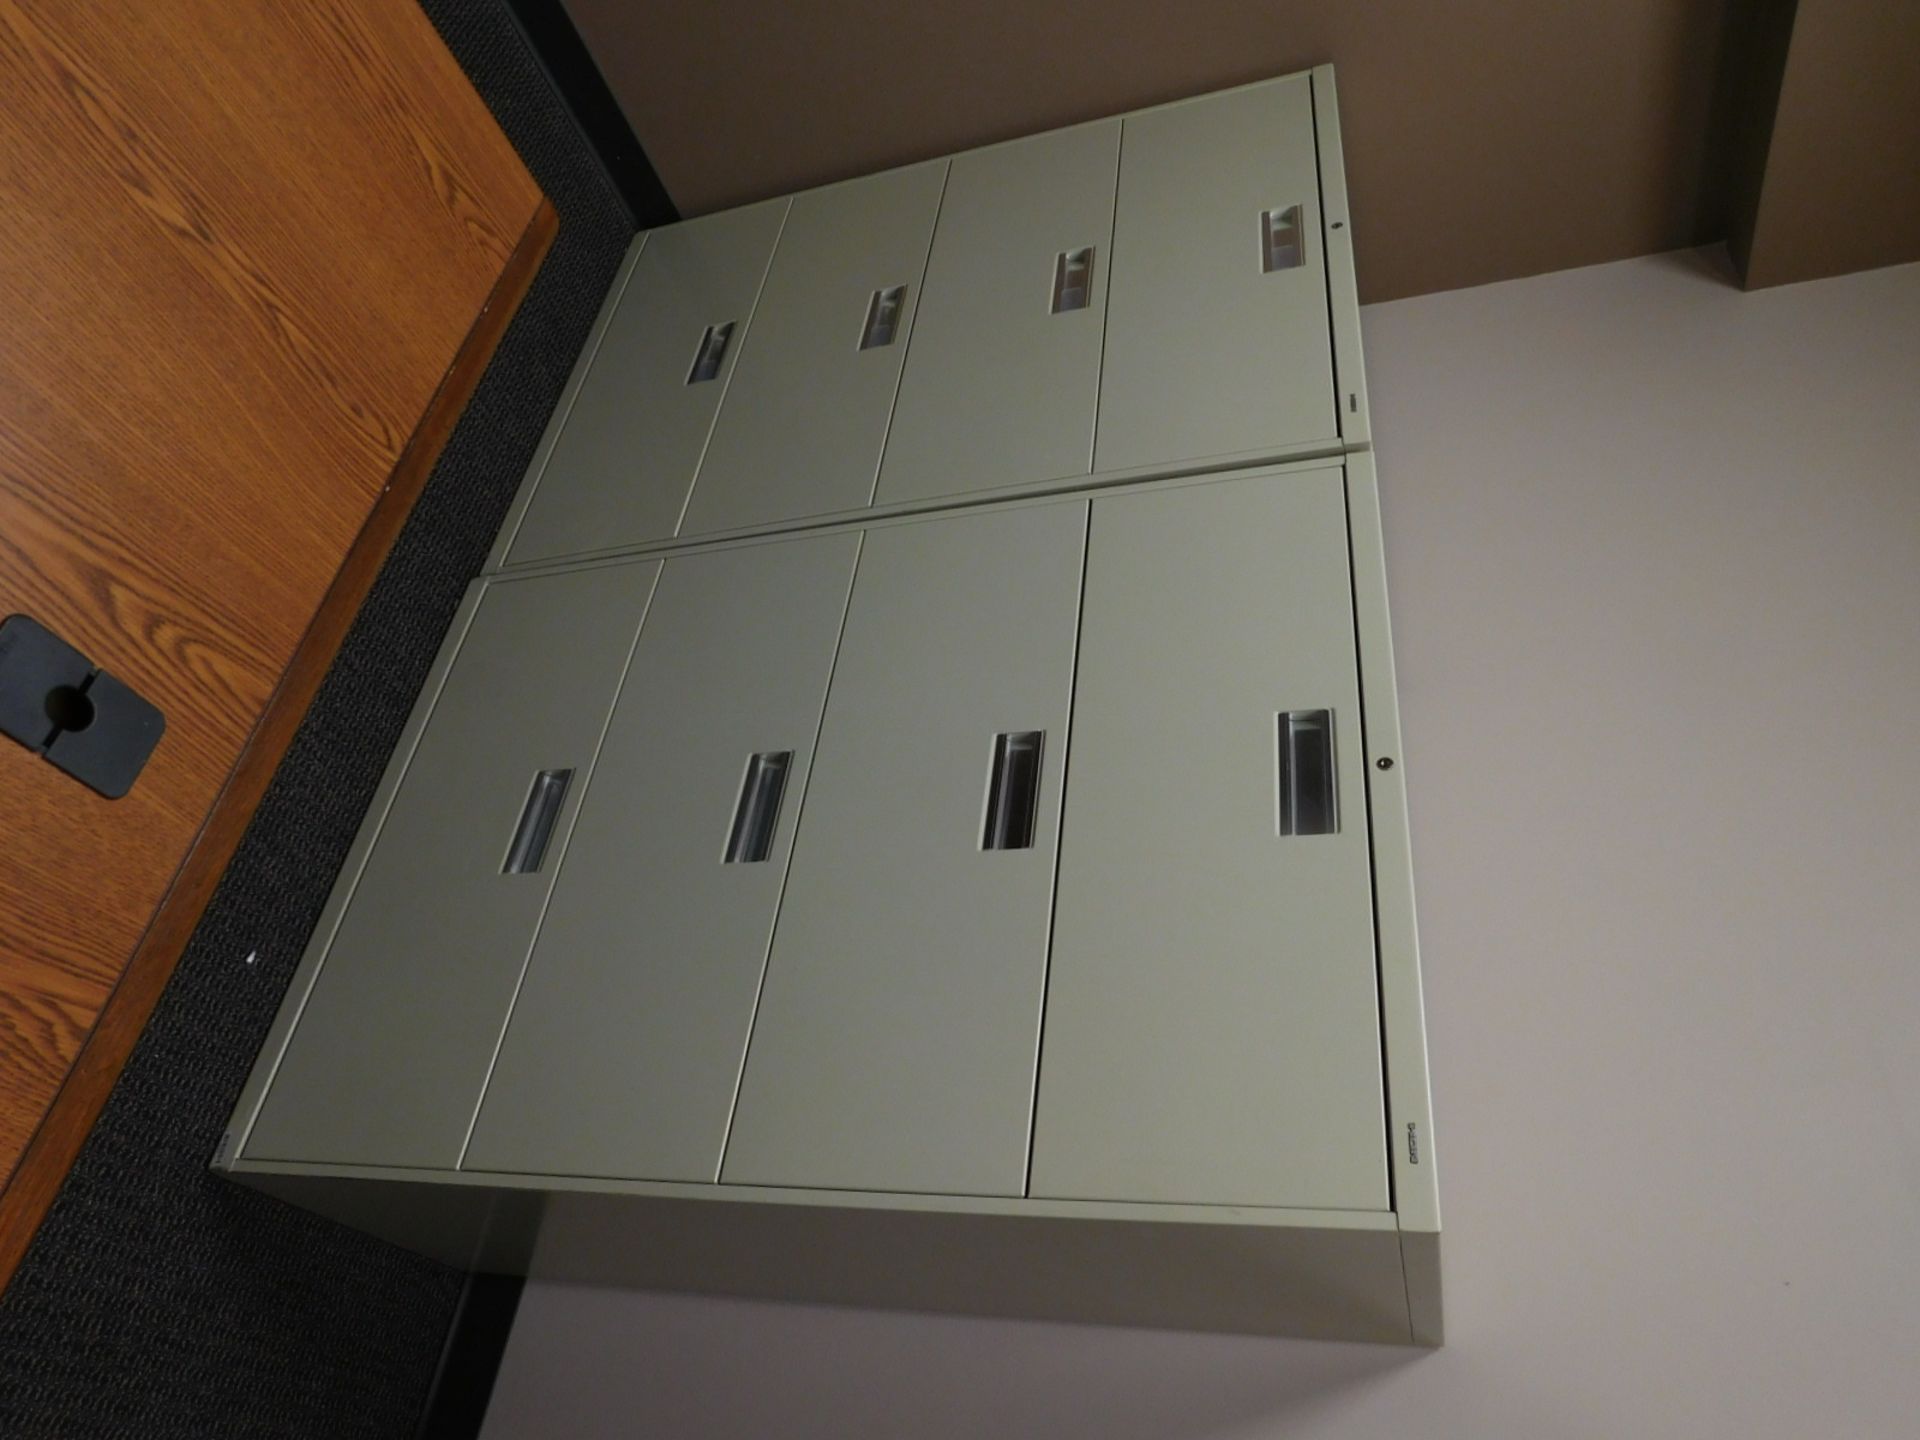 HON 4 DRAWER, 36" WIDE LEGAL OR LETTER SIZE LOCKING LATERAL FILE CABINETS